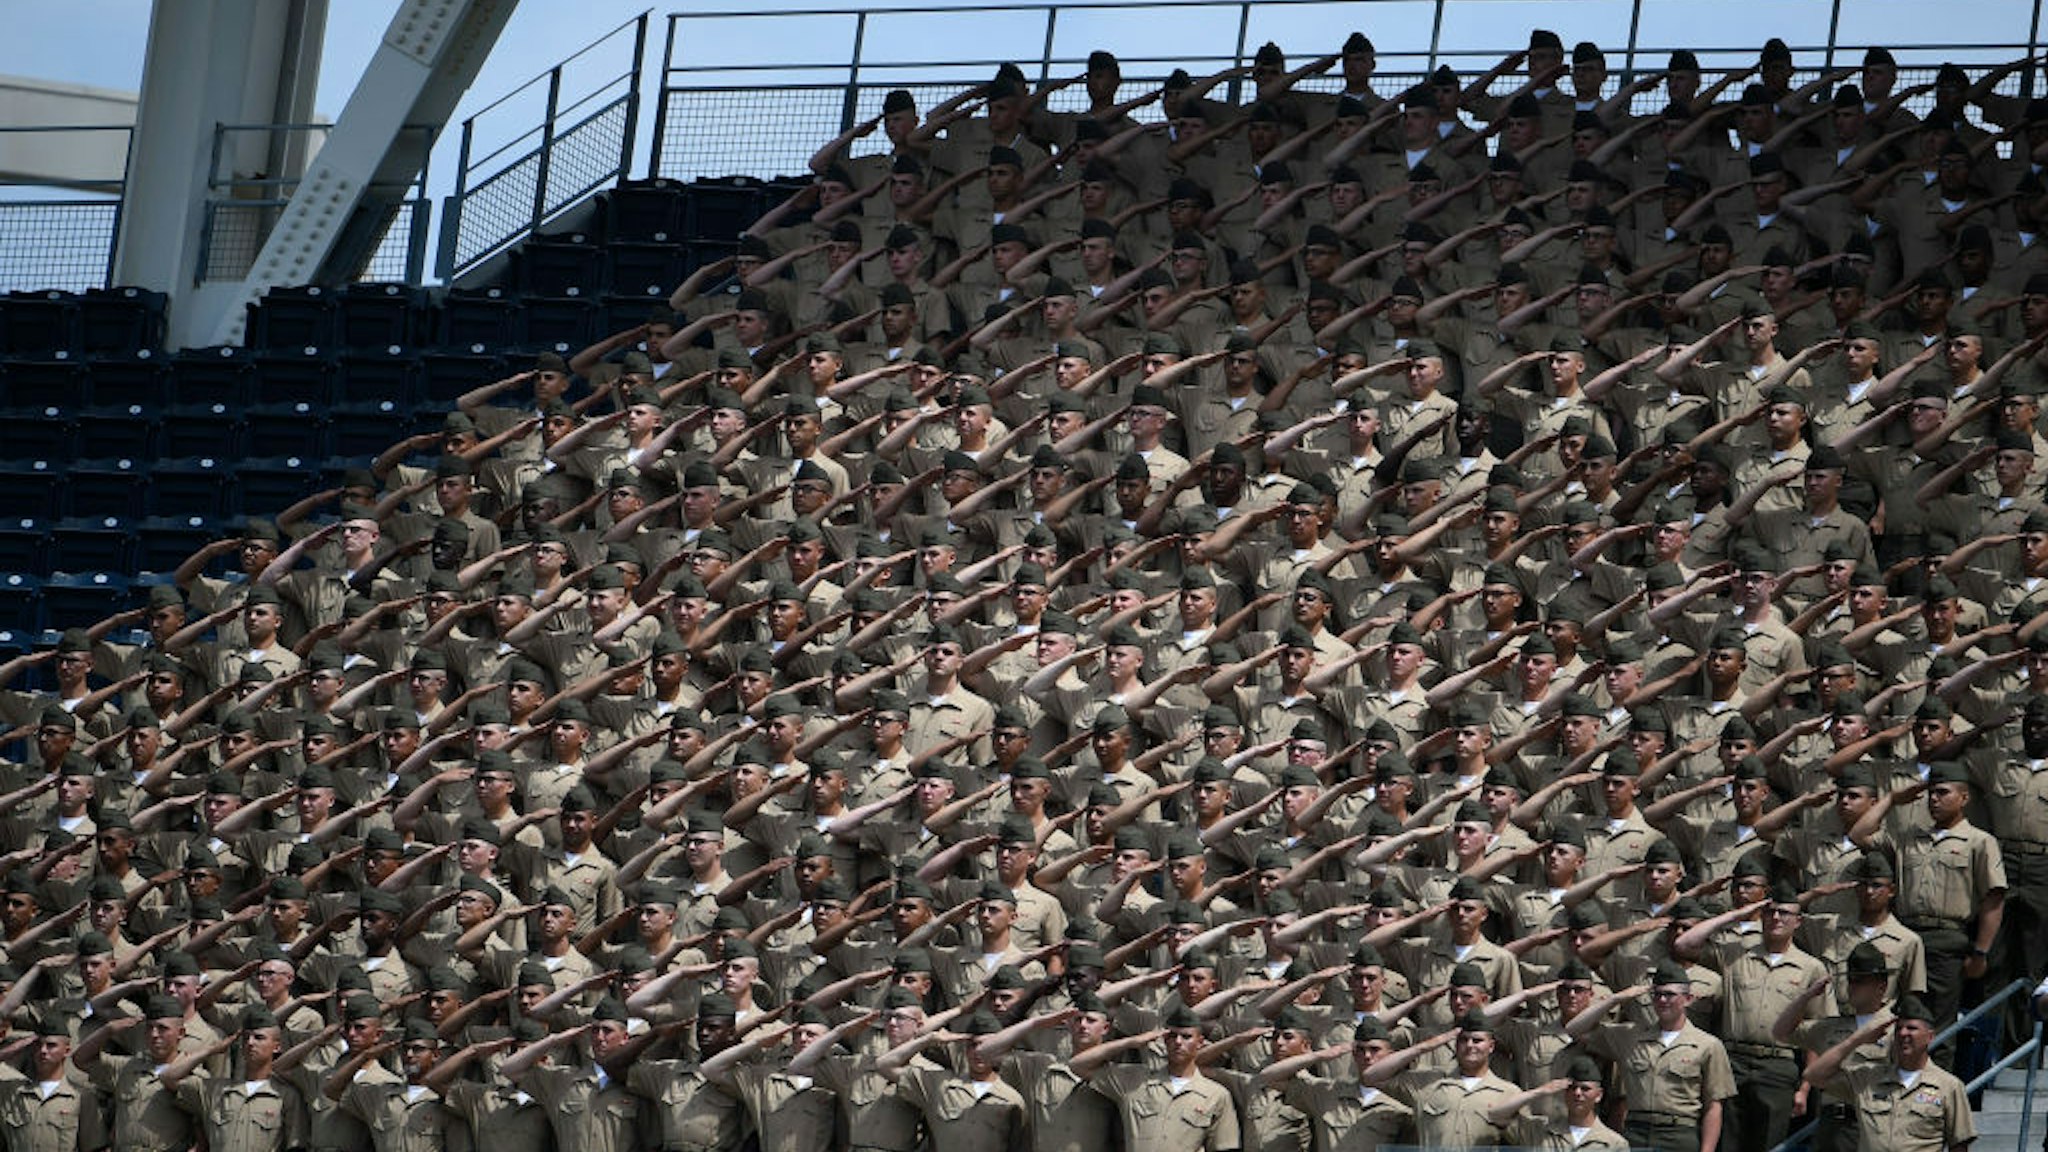 U.S. Marine Corps recruits salute before a baseball game between San Francisco Giants and San Diego Padres at PETCO Park as part of Military Opening Day on April 9, 2017 in San Diego, California.